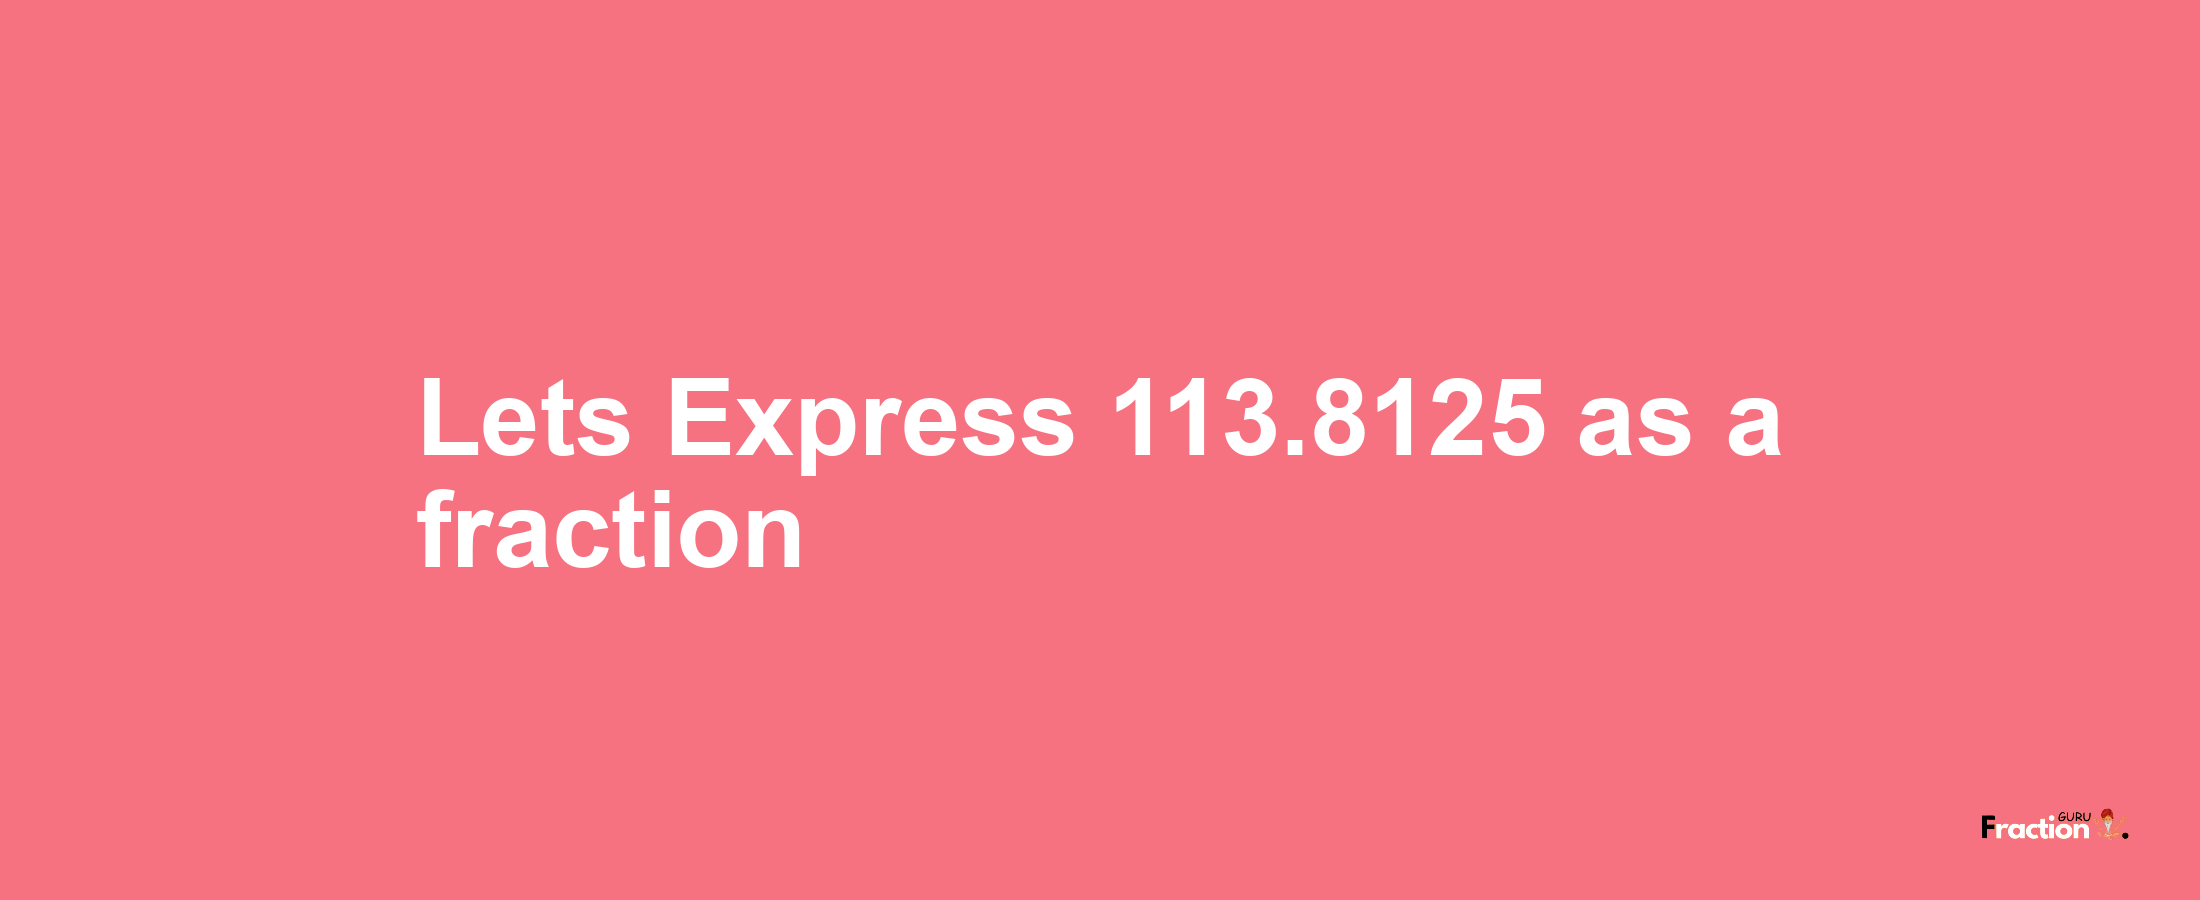 Lets Express 113.8125 as afraction